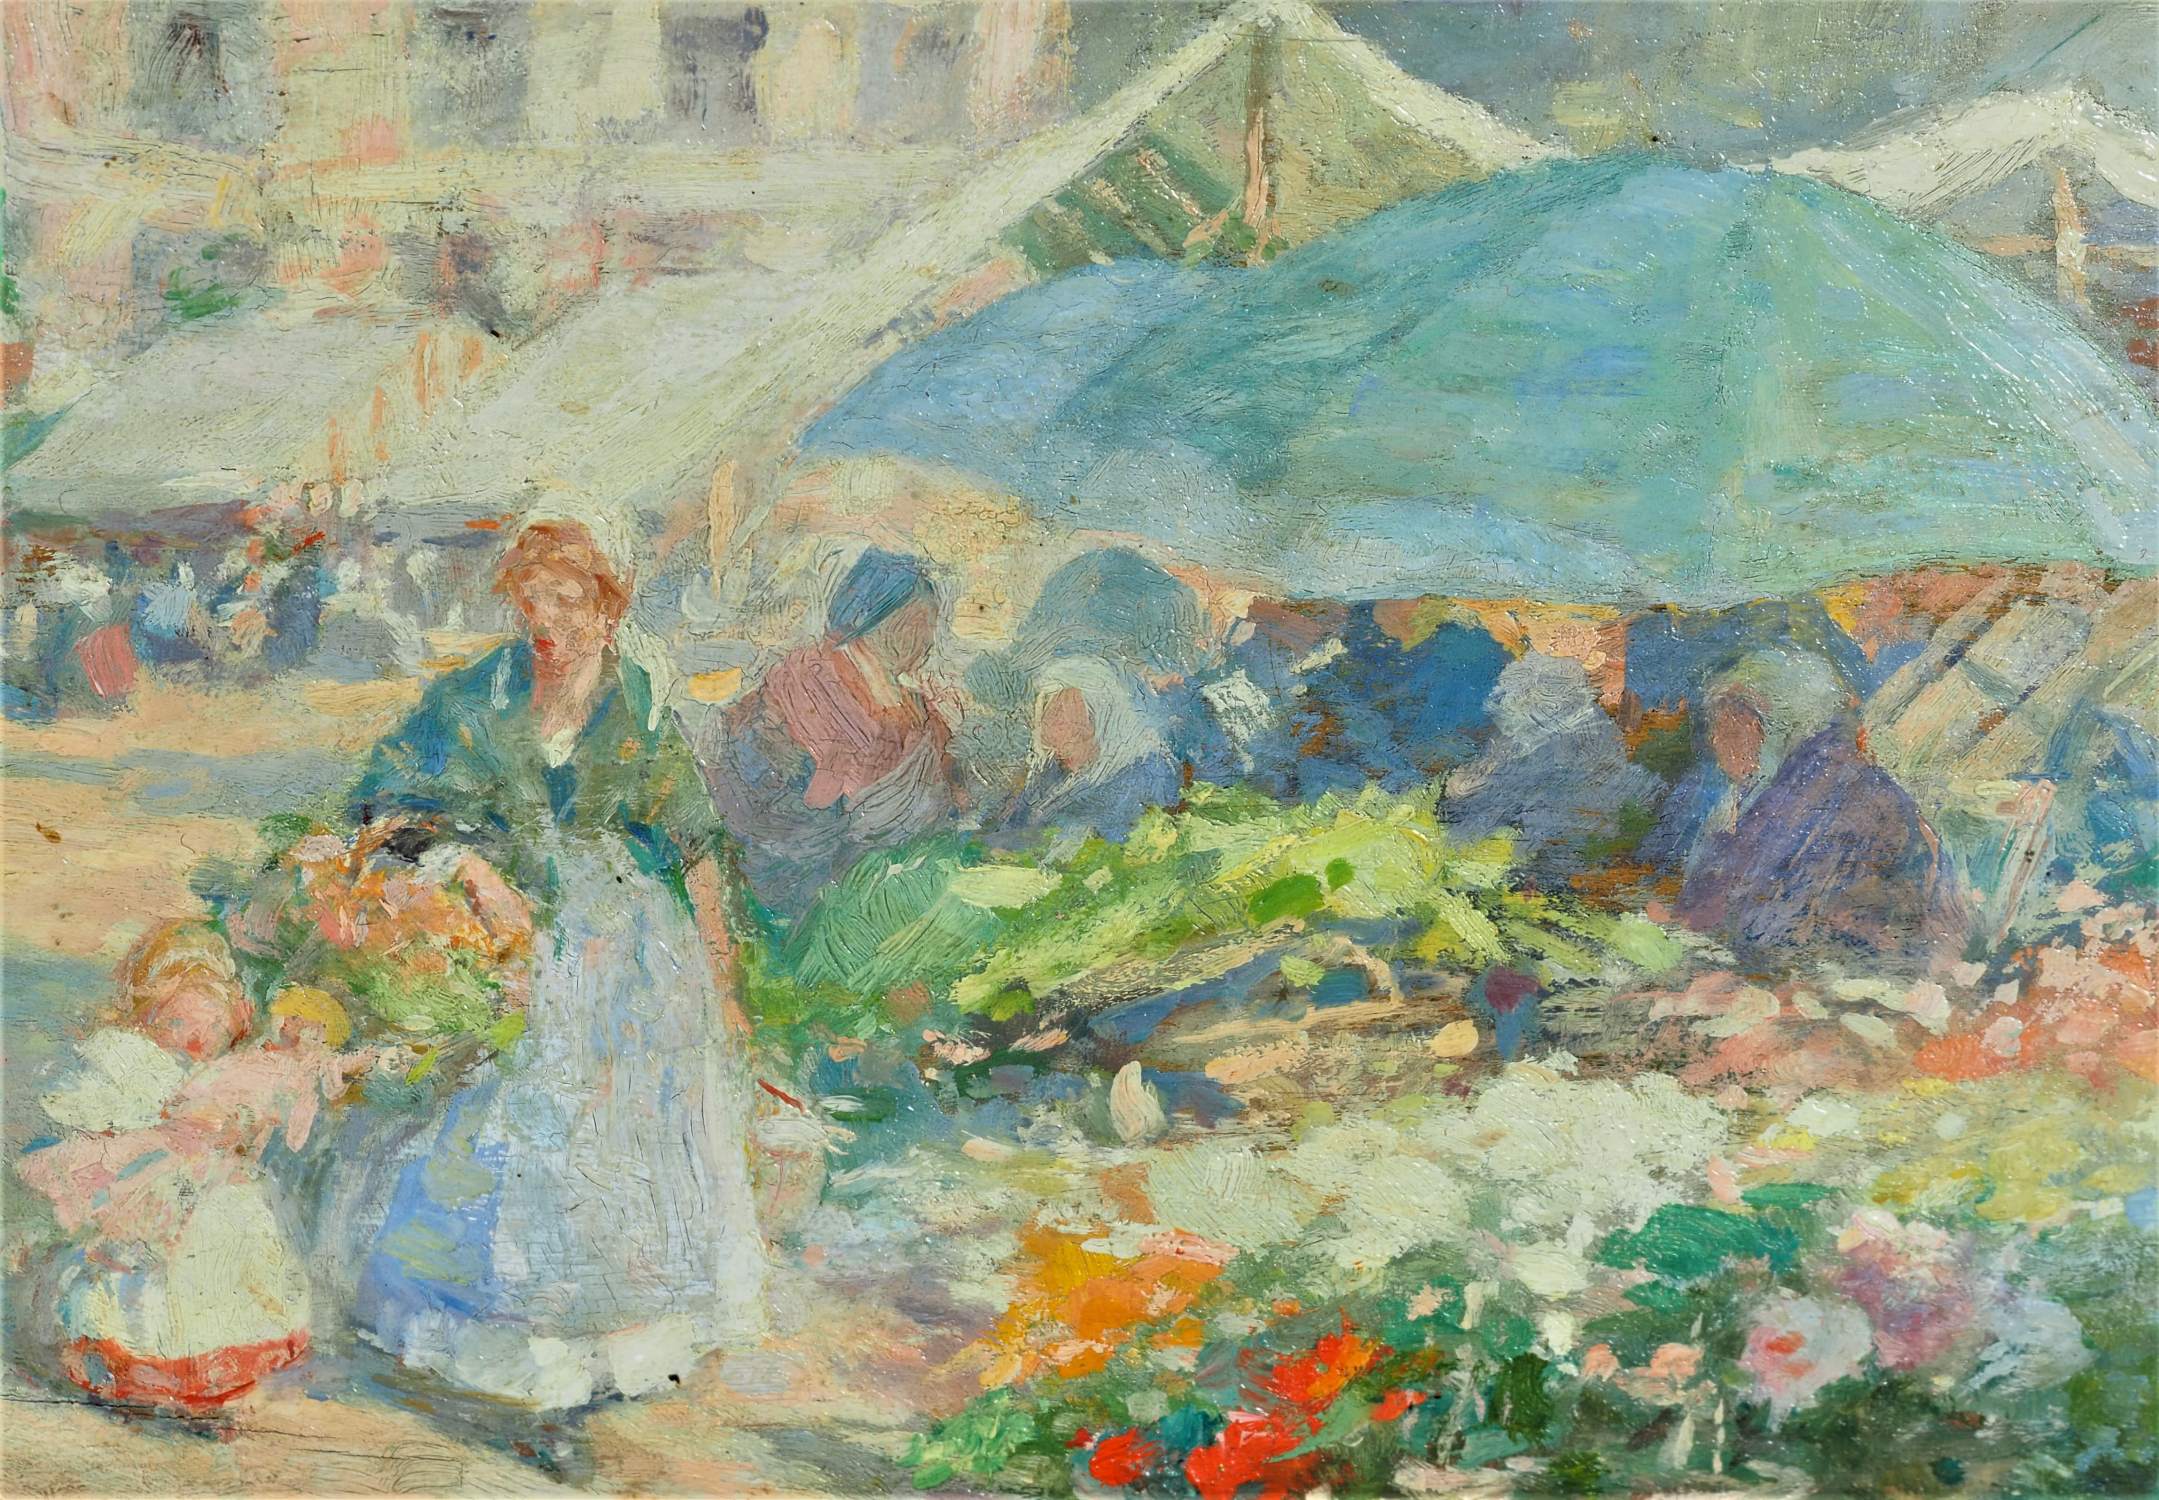 Gennaro Befani (1866, Naples - 1949, Bagneux) - Flower market, late 19th c. - Image 4 of 5